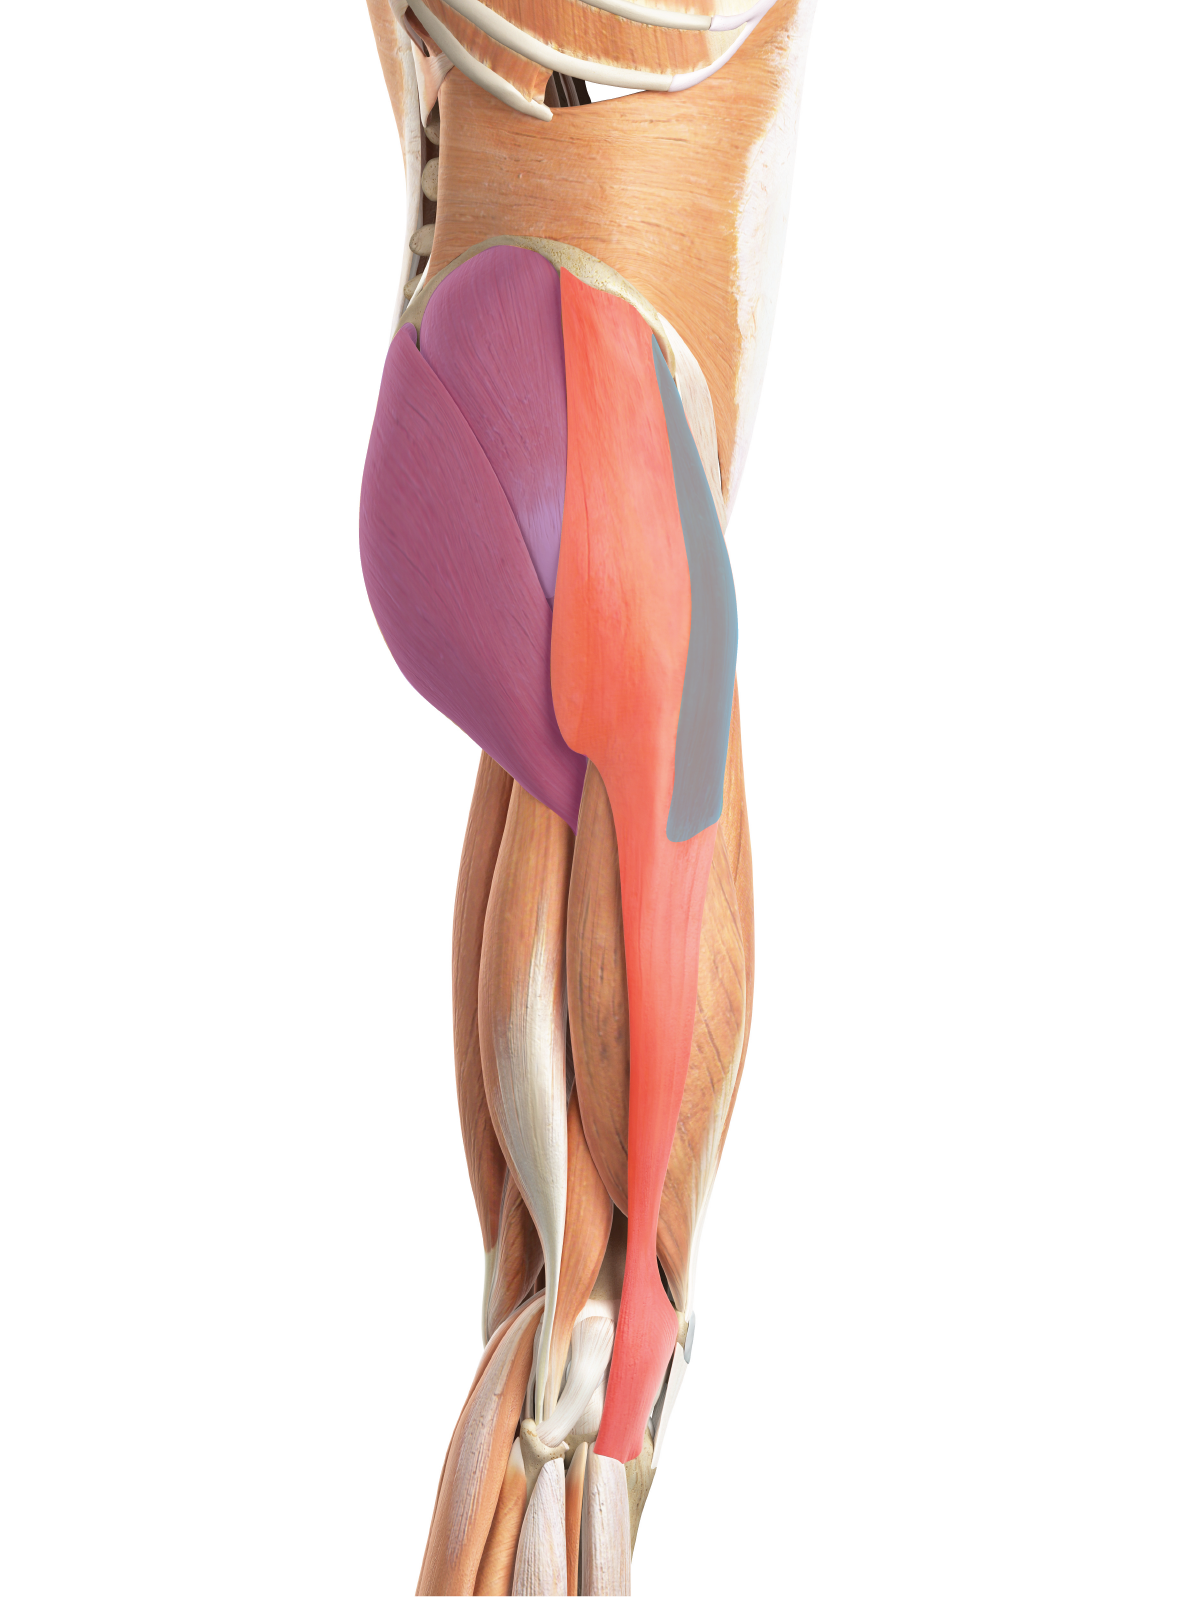 These IT band stretches are great for reducing hip and knee pain